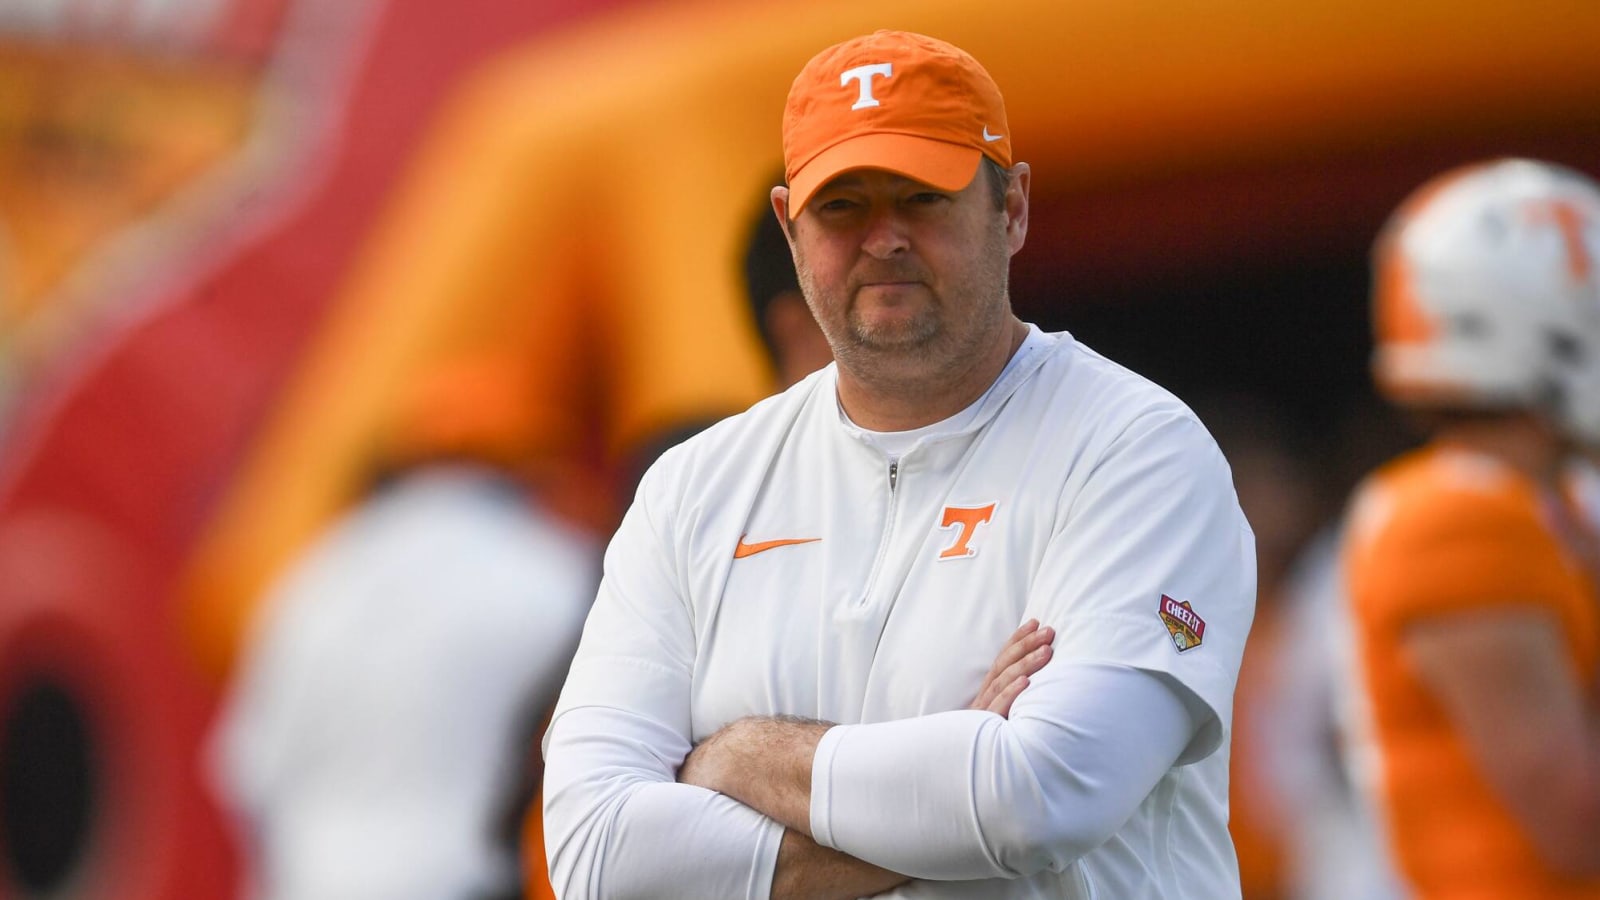 Josh Heupel explains the next step that Tennessee needs to take as a football program as the Vols pursue championships